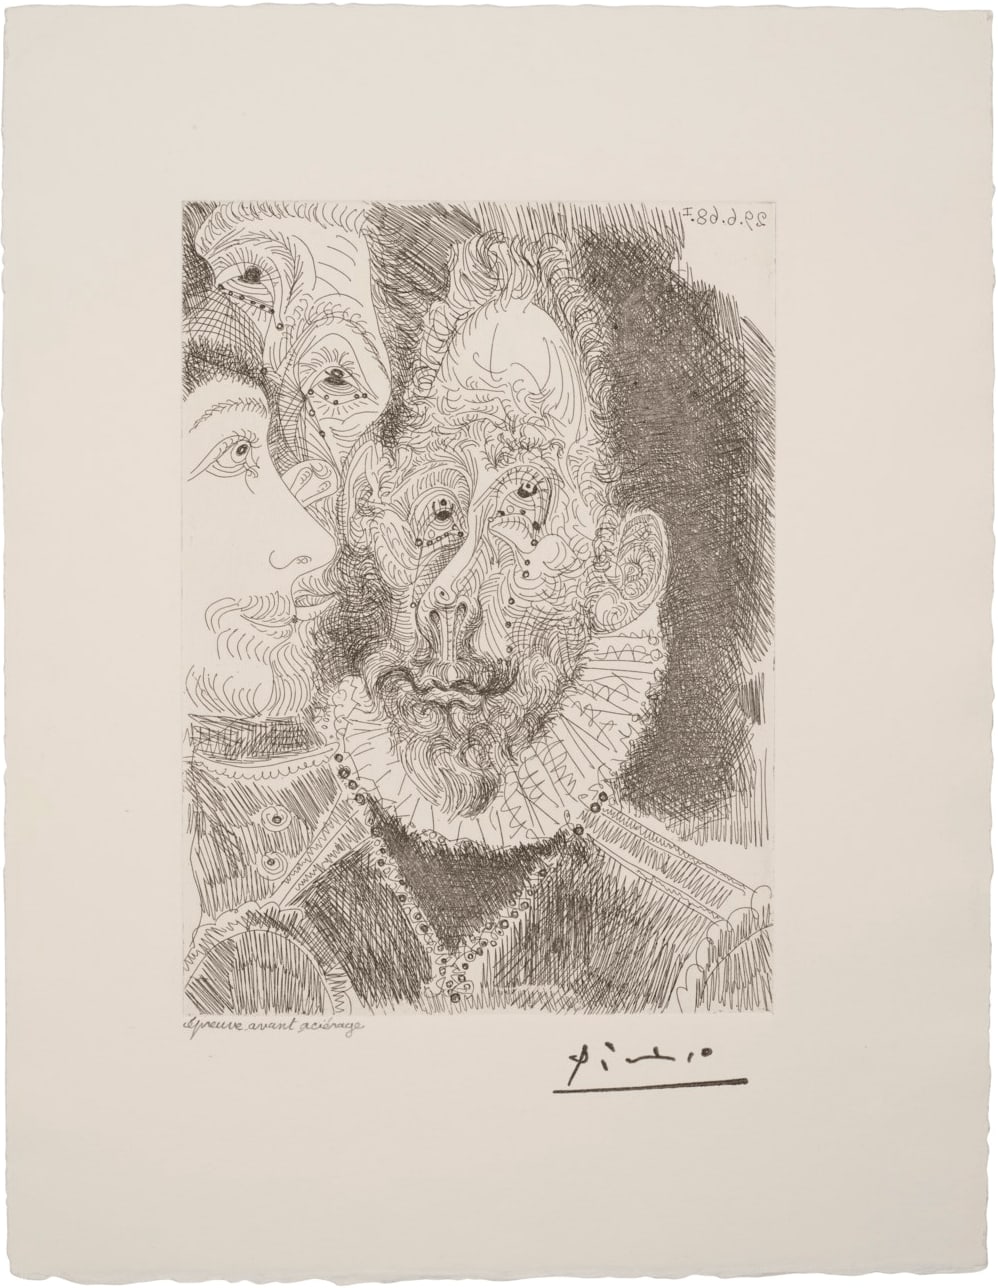 Original signed Picasso Prints for sale, drawings, Lithographs, Linocut,  Etching